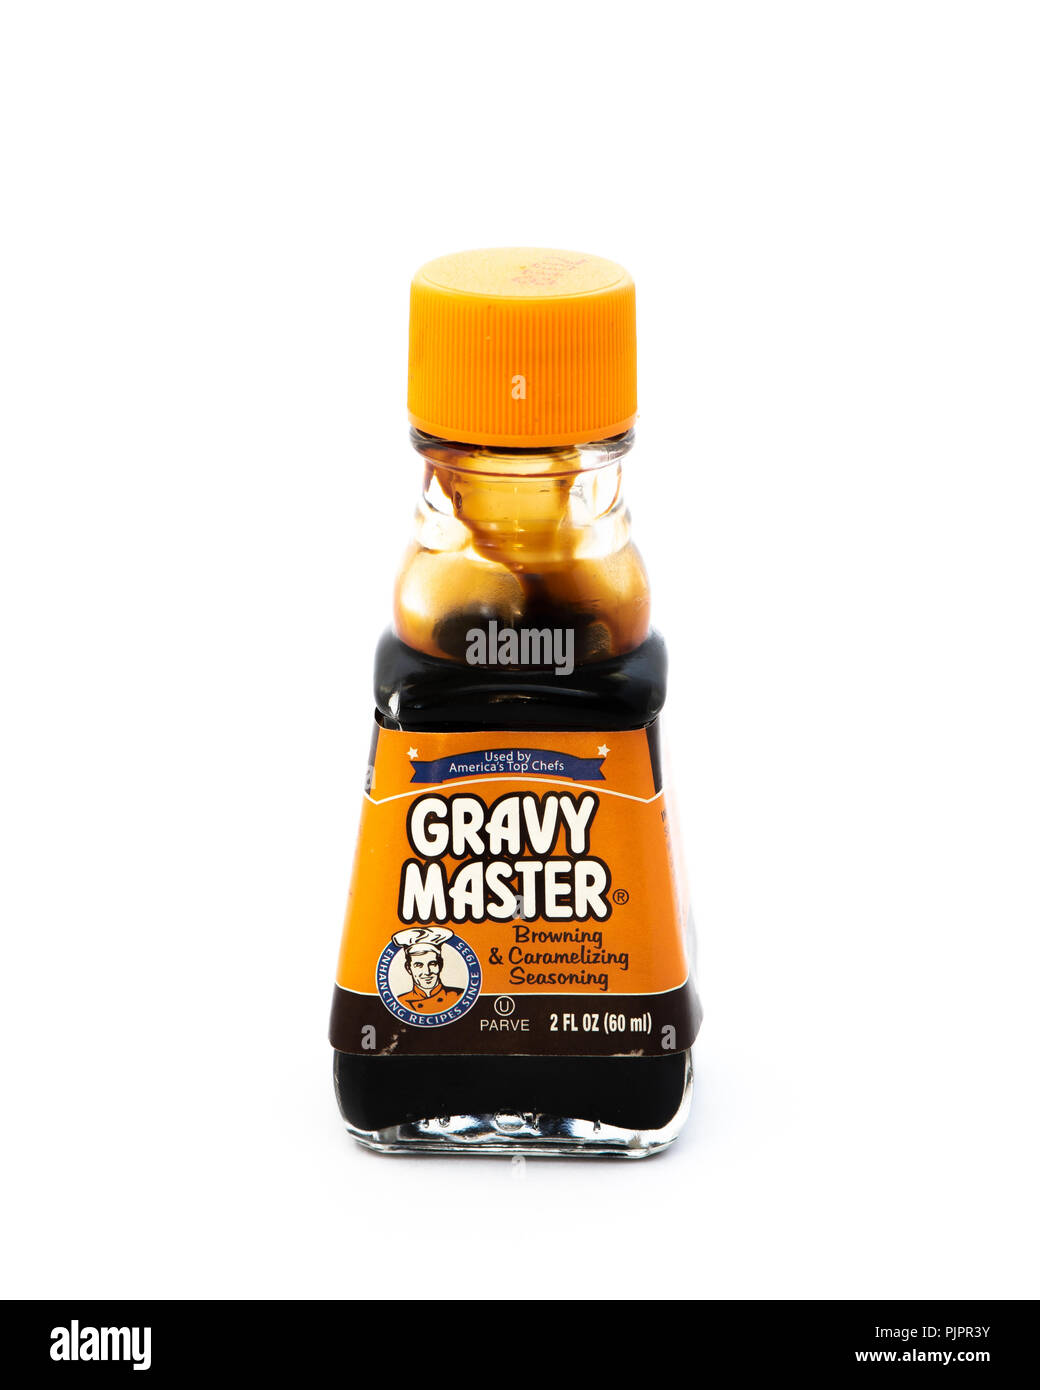 A glass bottle of Gravy Master, a flavor enhancing, browning and caramelizing seasoning. Stock Photo